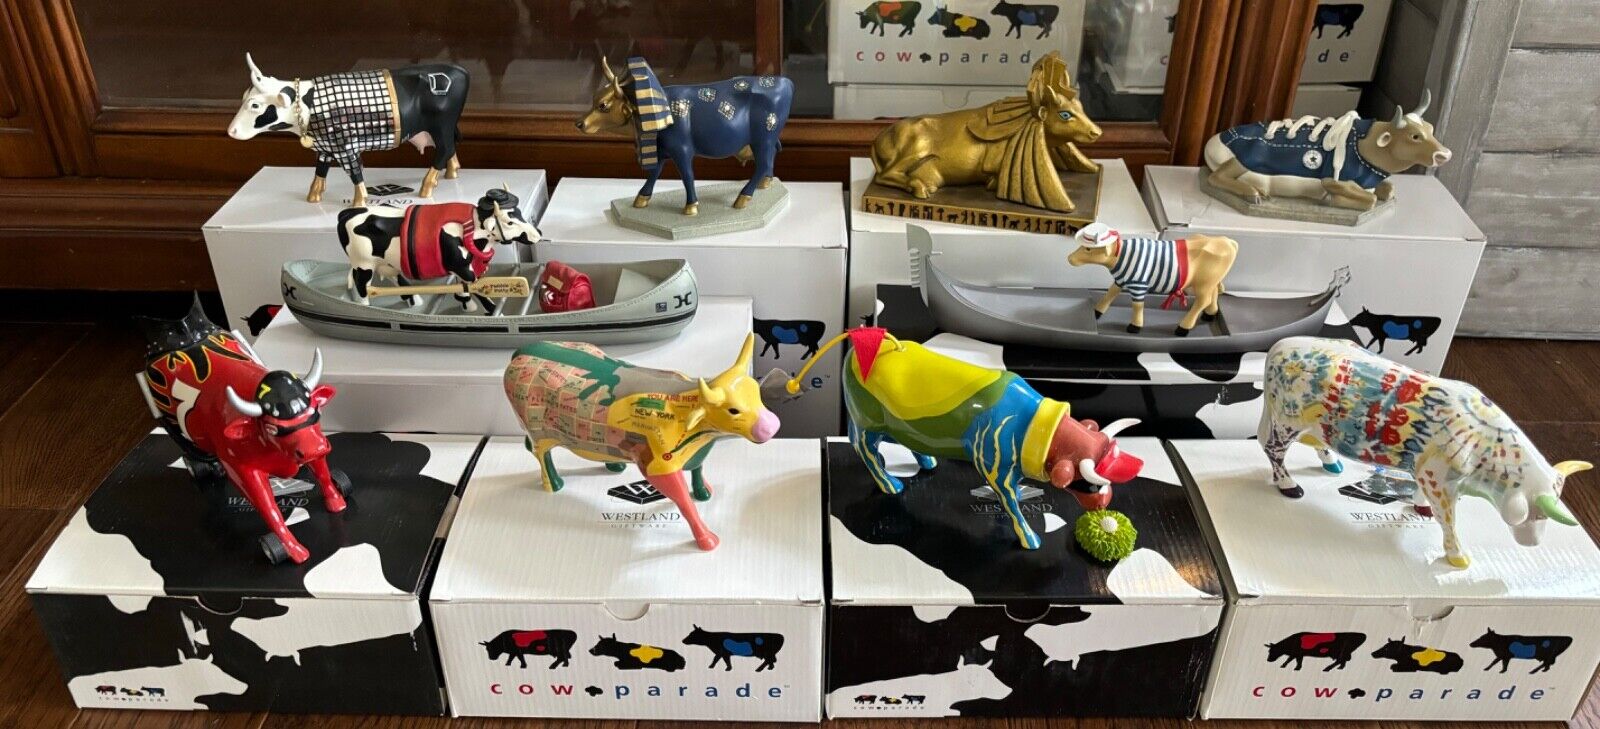 huge lot of 10 cowparade figurines